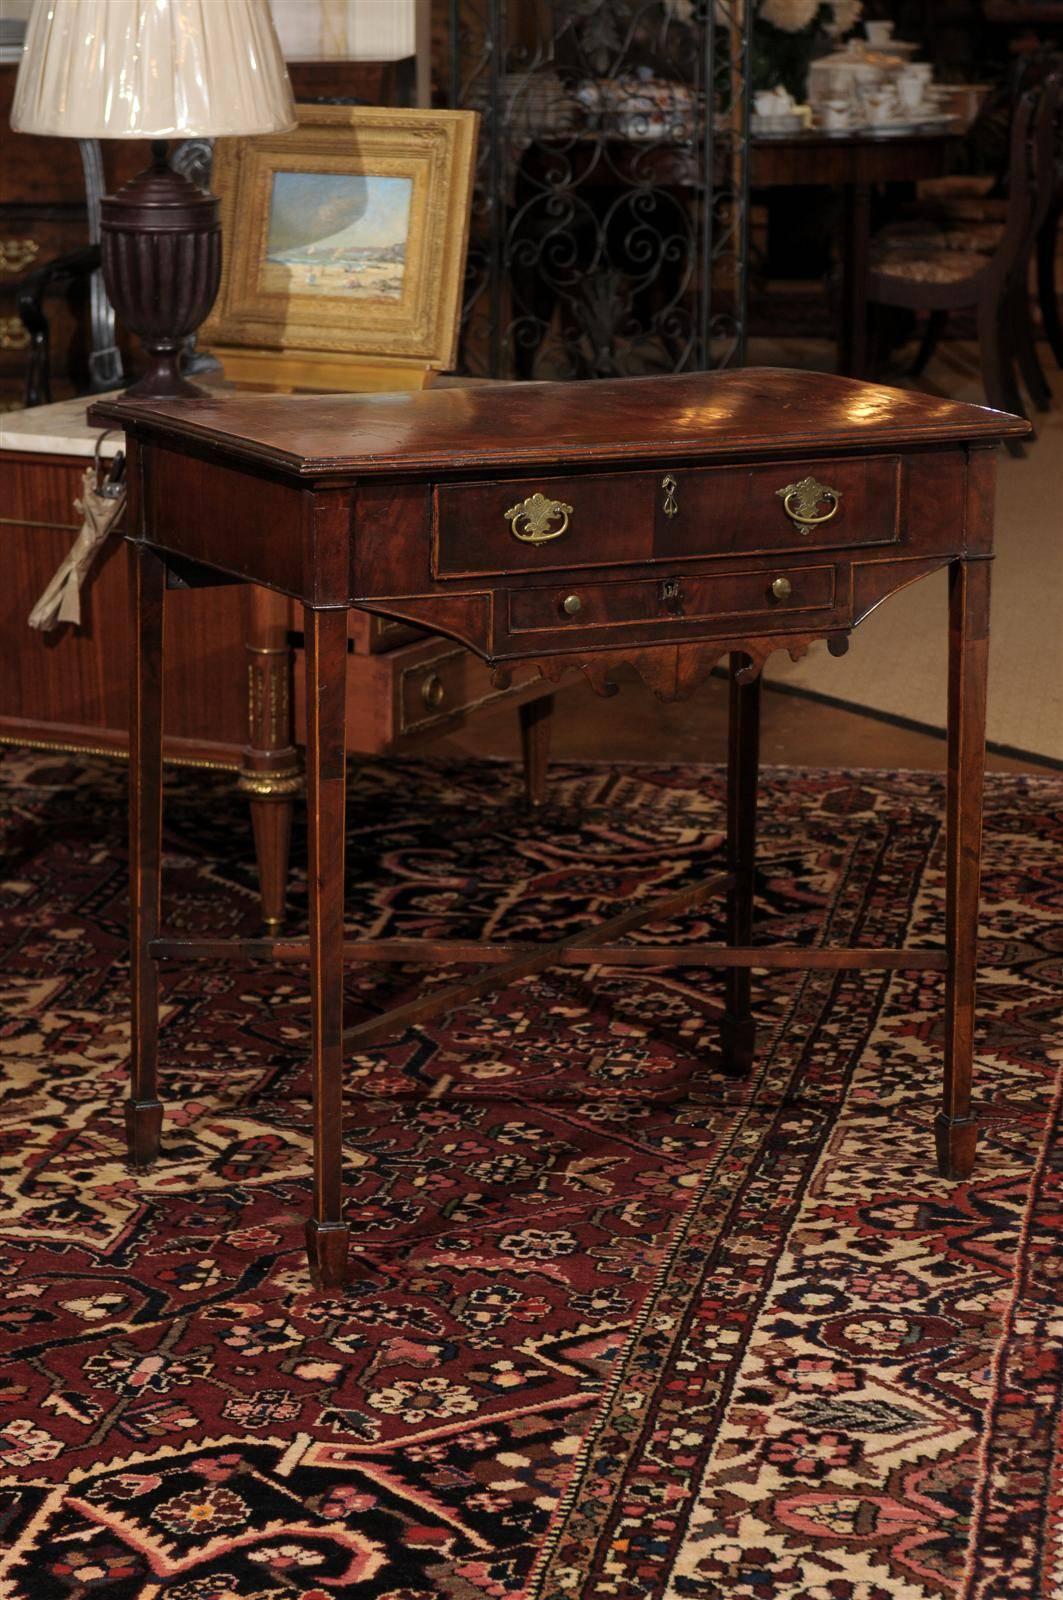 A beautiful period George ll side table with satinwood inlay. A scalloped apron underneath a small drawer is supported by tapered legs with X-stretcher.